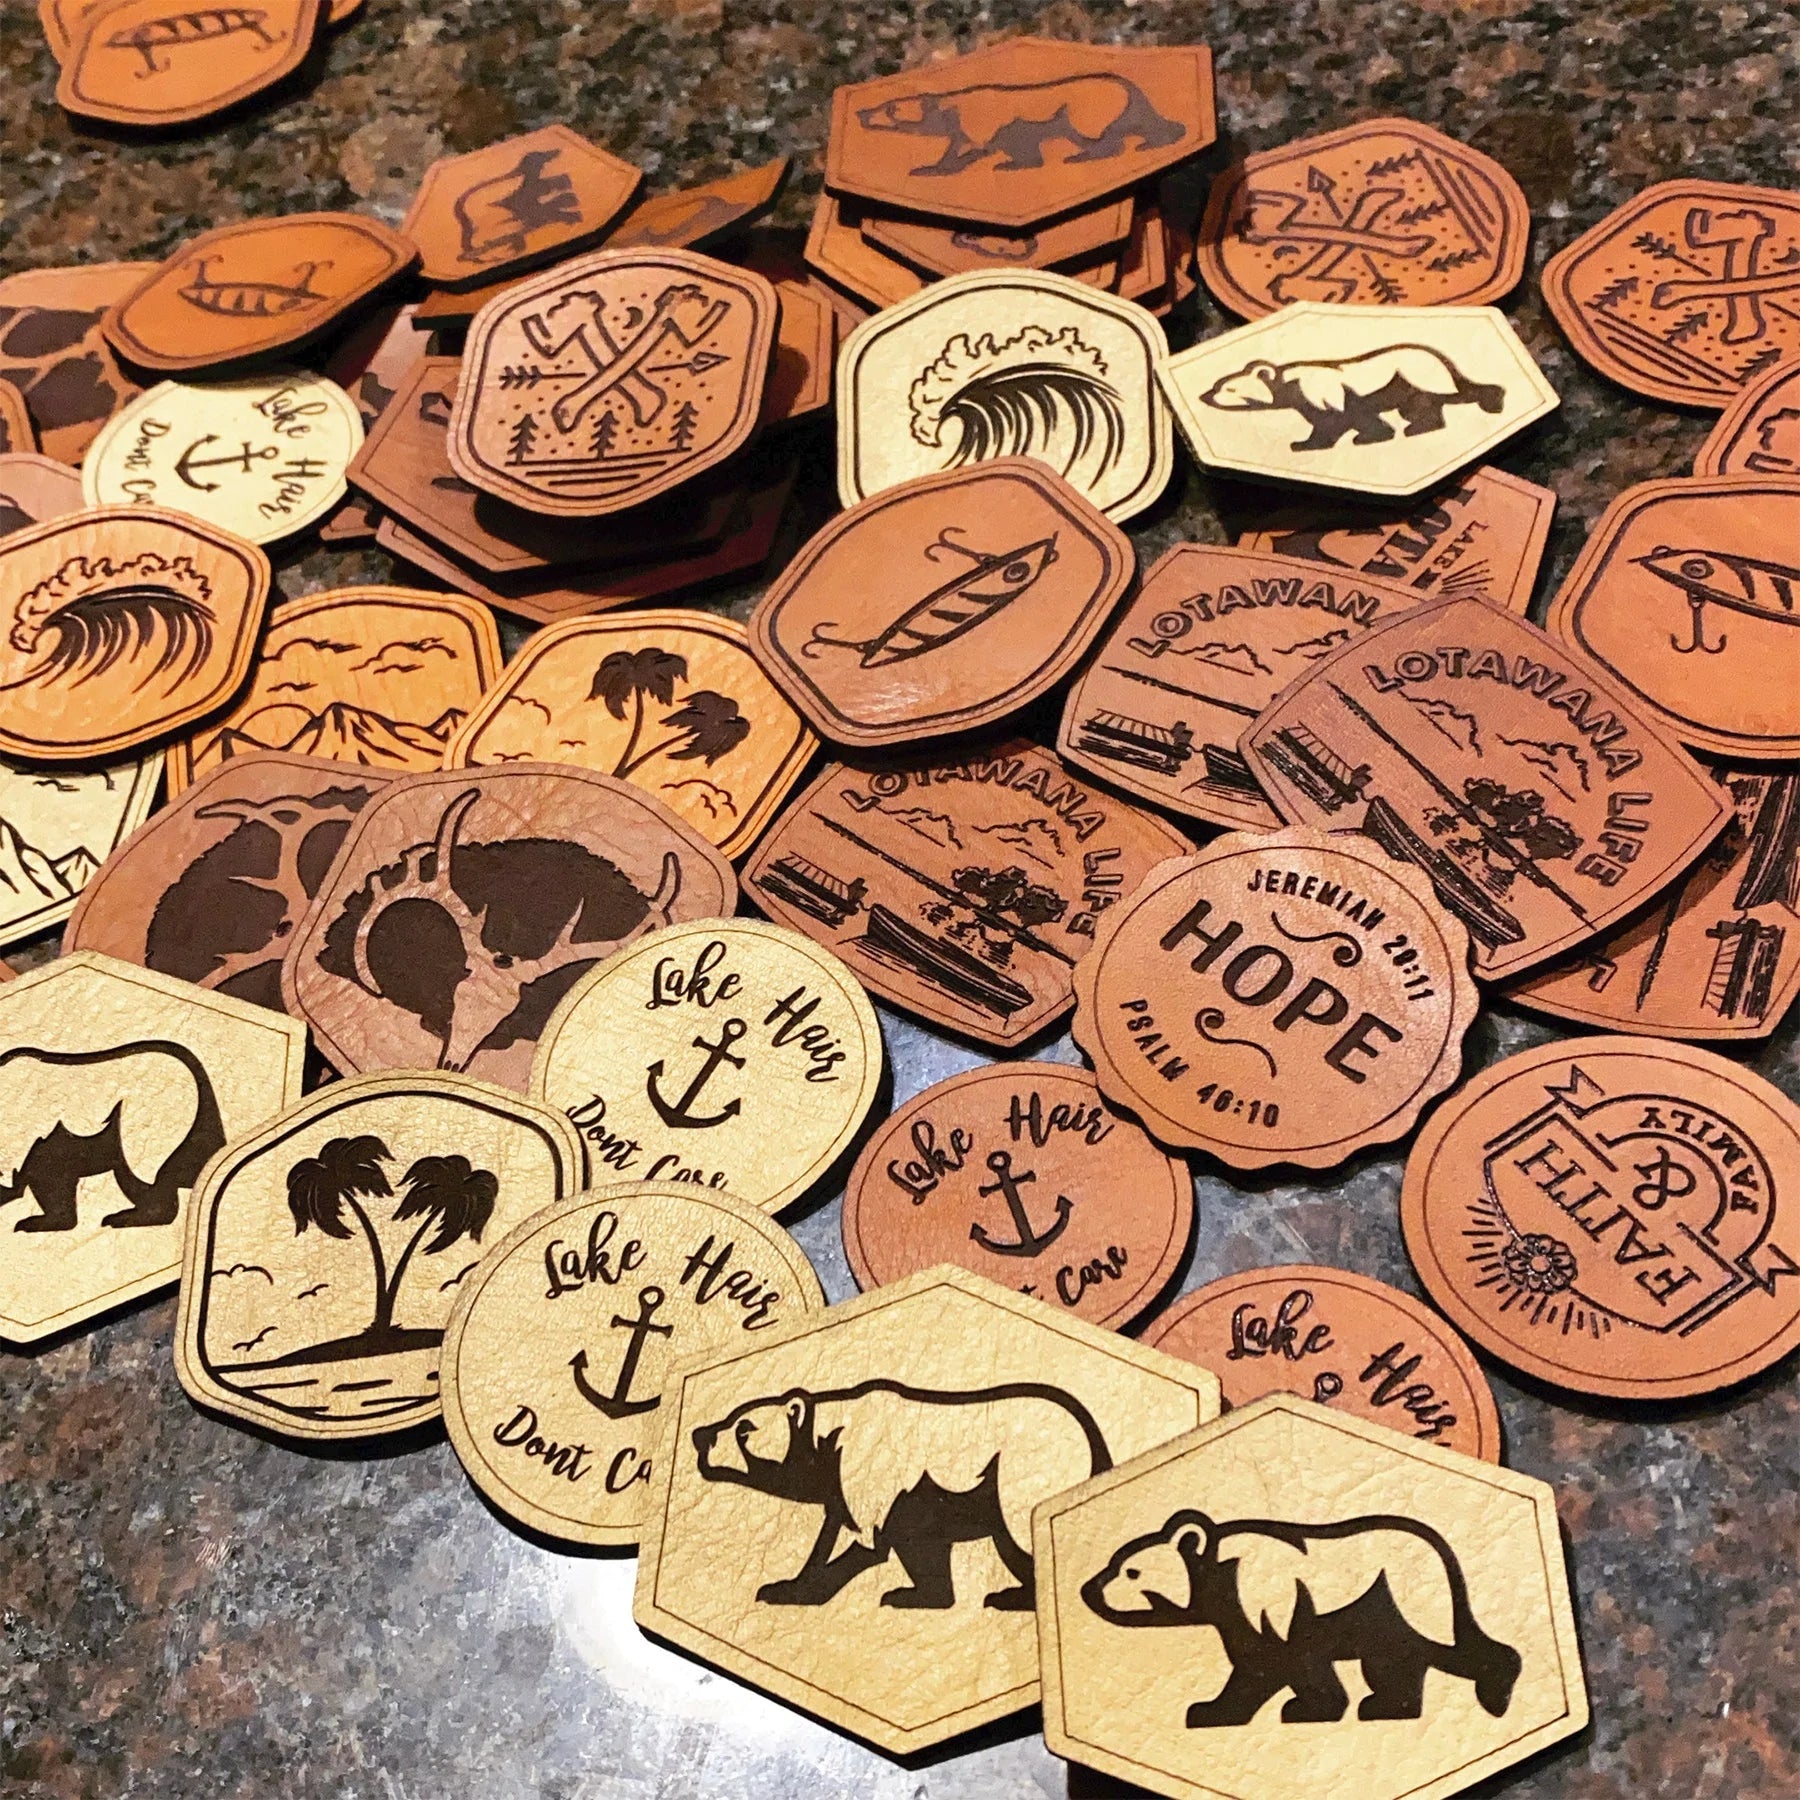 12 Custom Laser Etched Leather Patches, Company Patches, Personalized  Patches 